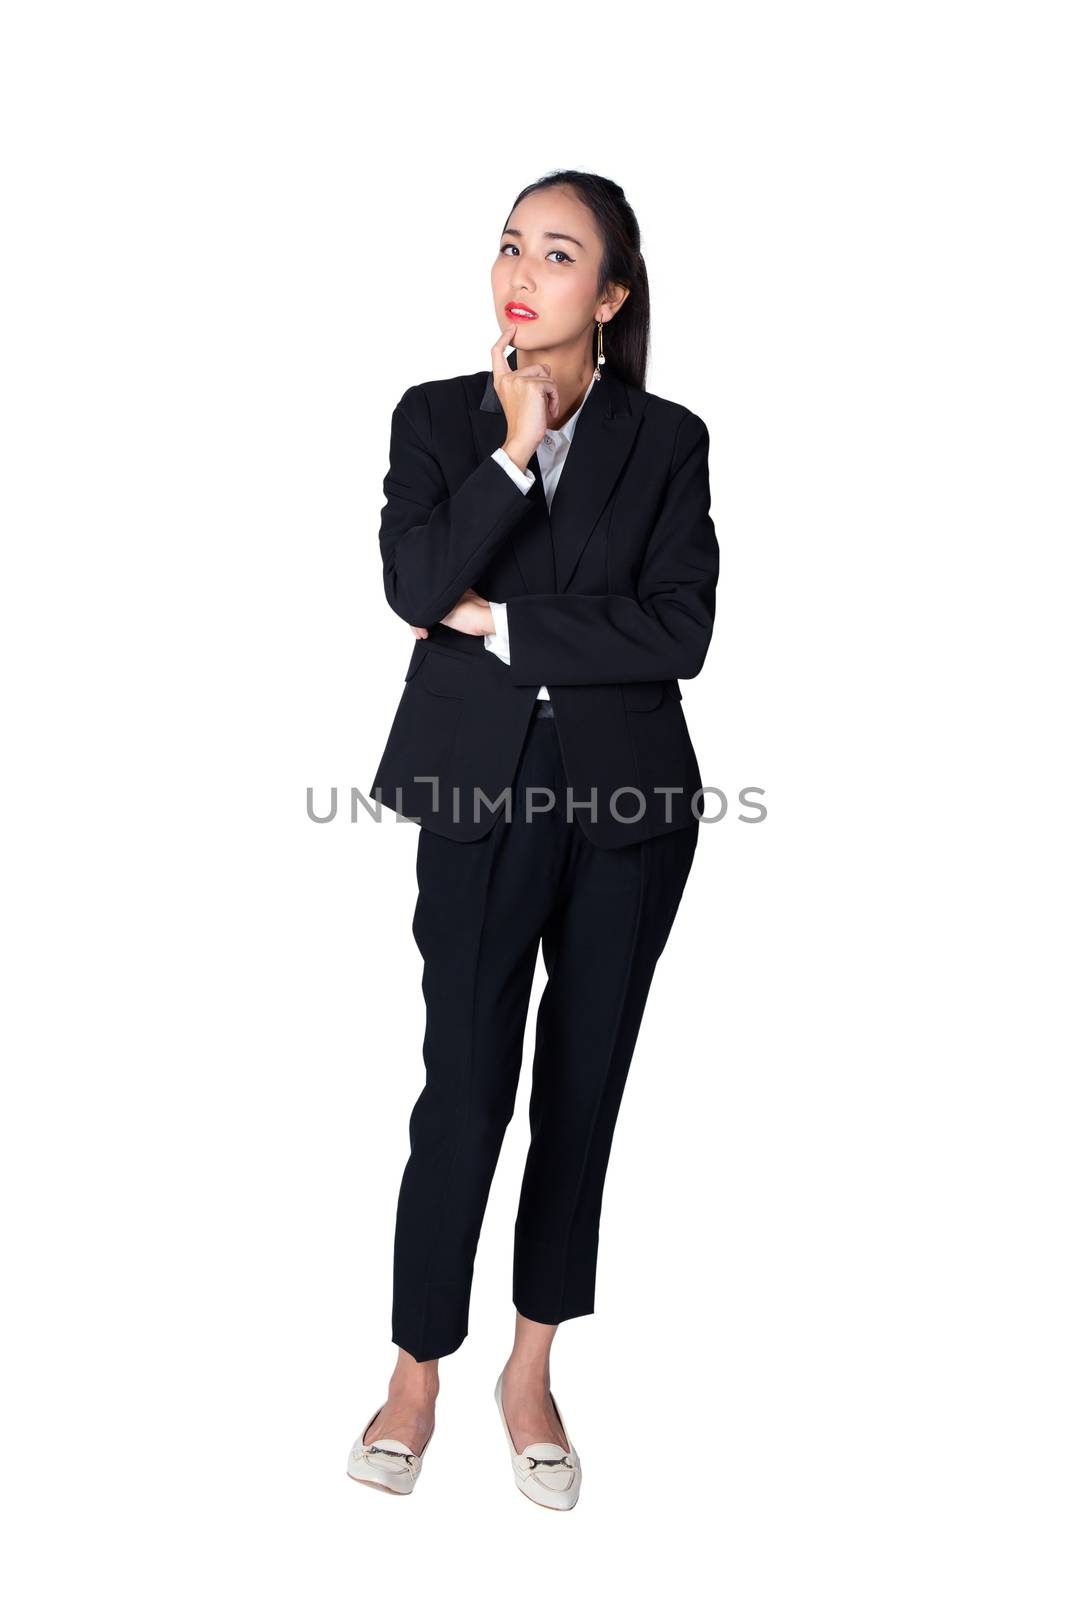 thinking business woman isolated on white background having an i by nnudoo